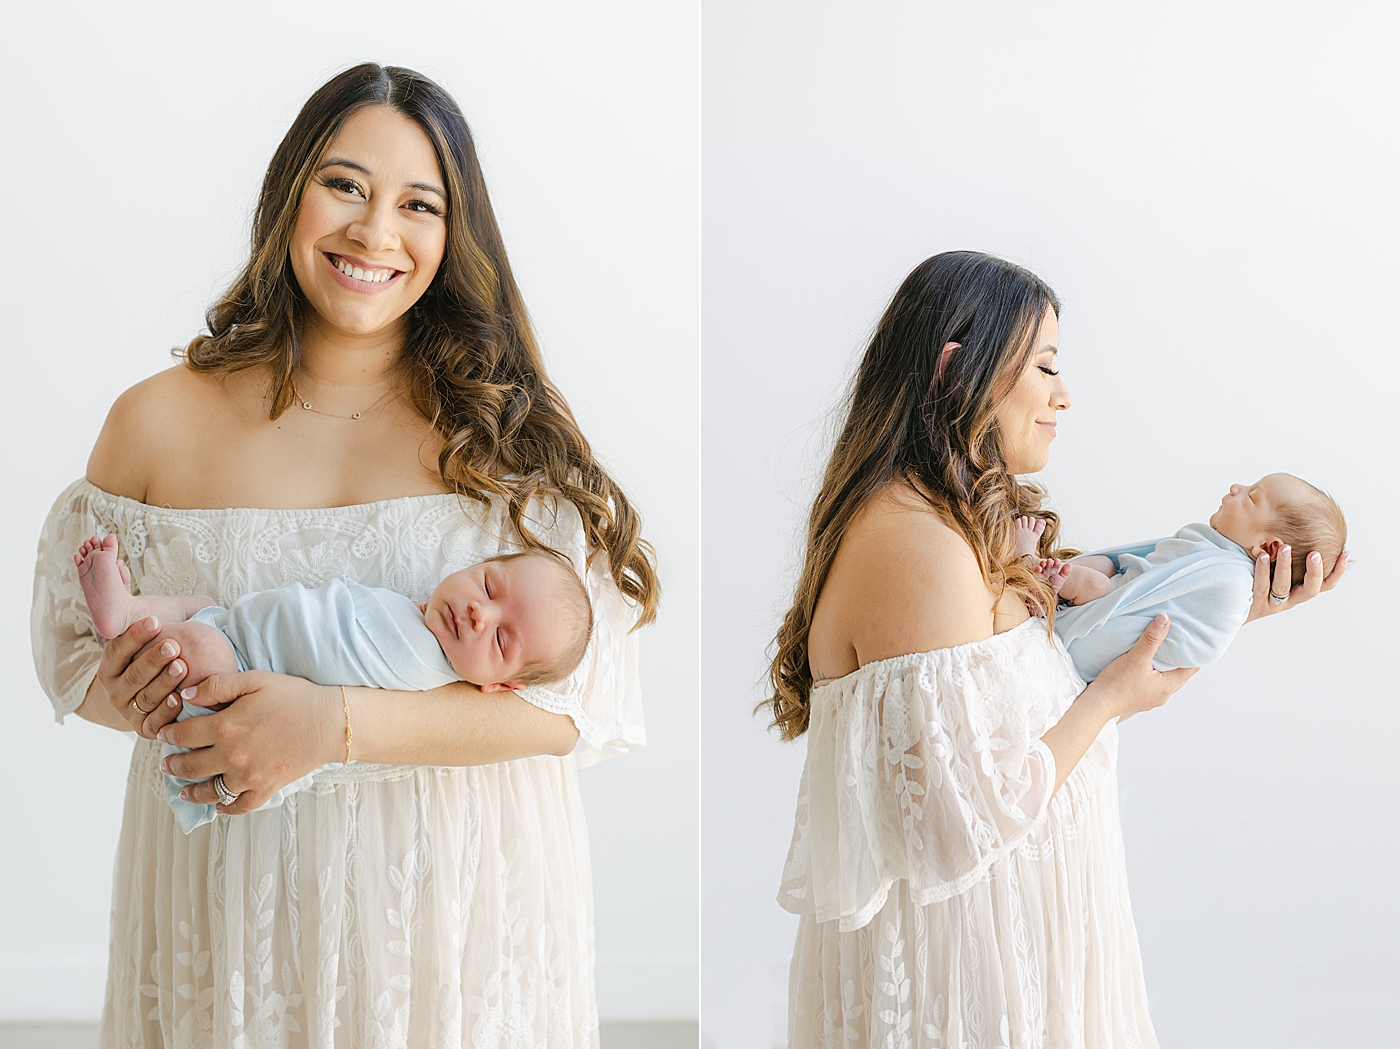 Mom in a lace dress smiling while holding her new baby | Image by Sana Ahmed Photography 